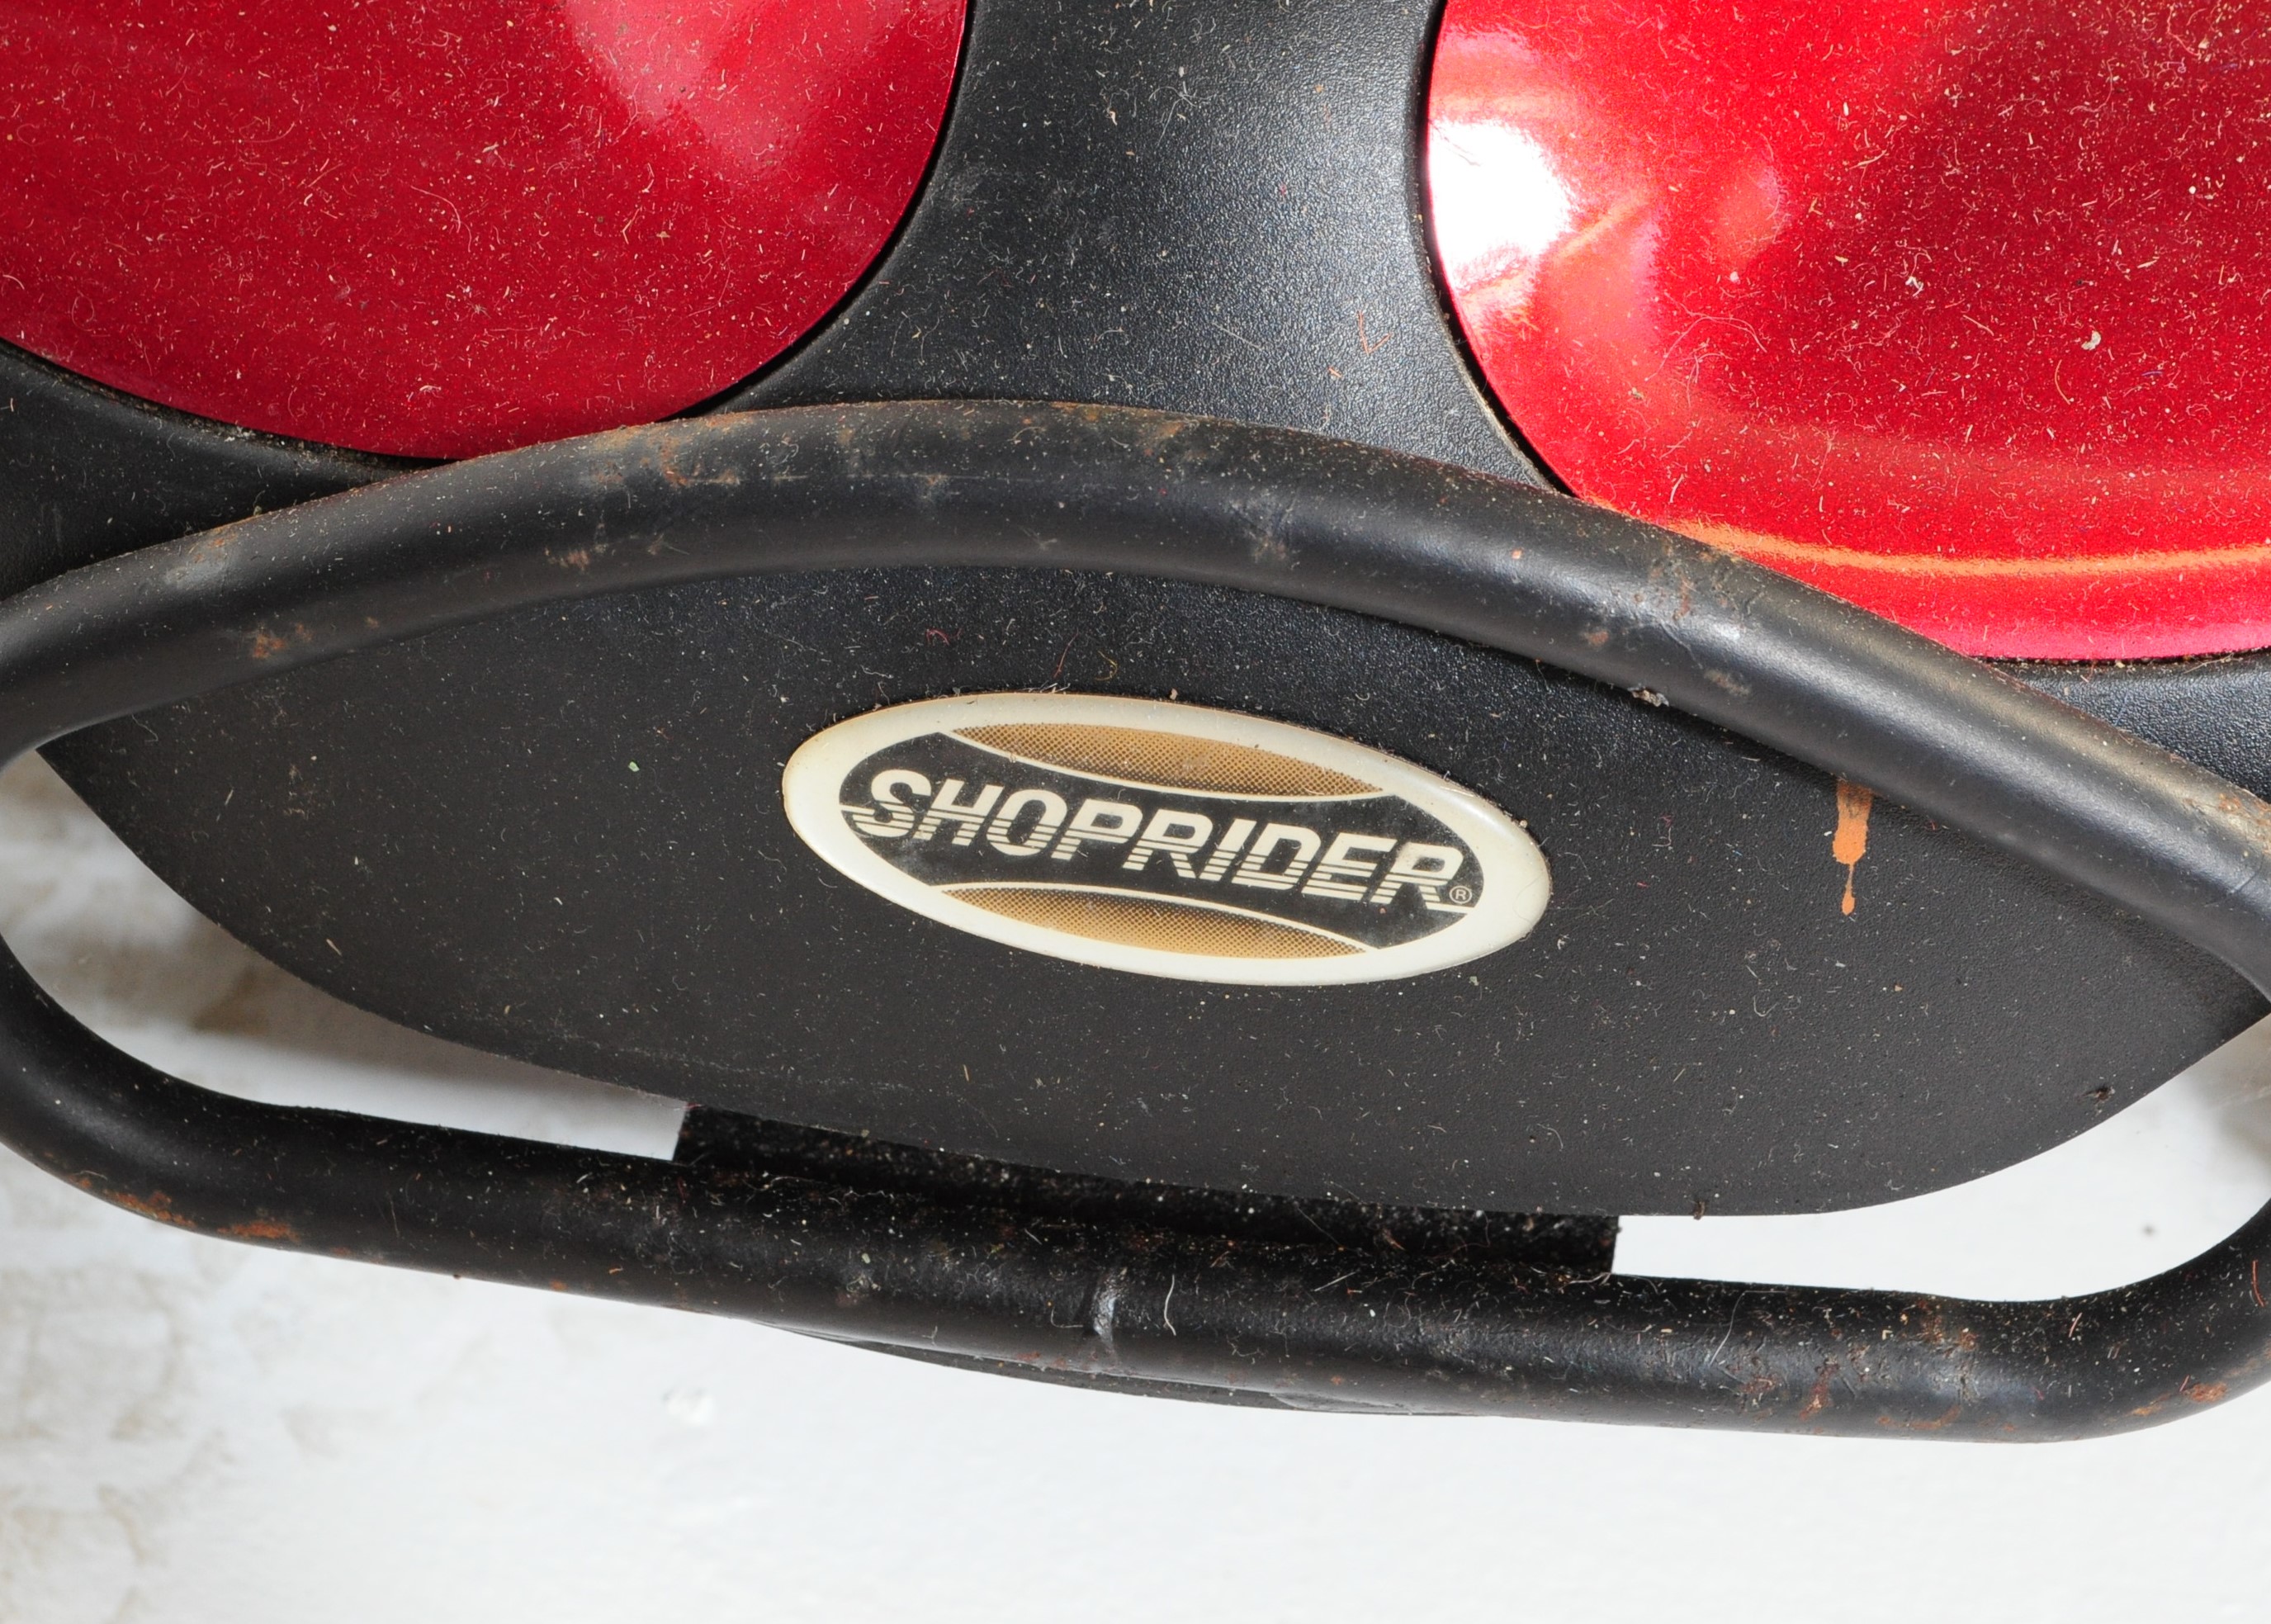 SHOPRIDER MOBILITY SCOOTER IN RED COLOURWAY - Image 4 of 6